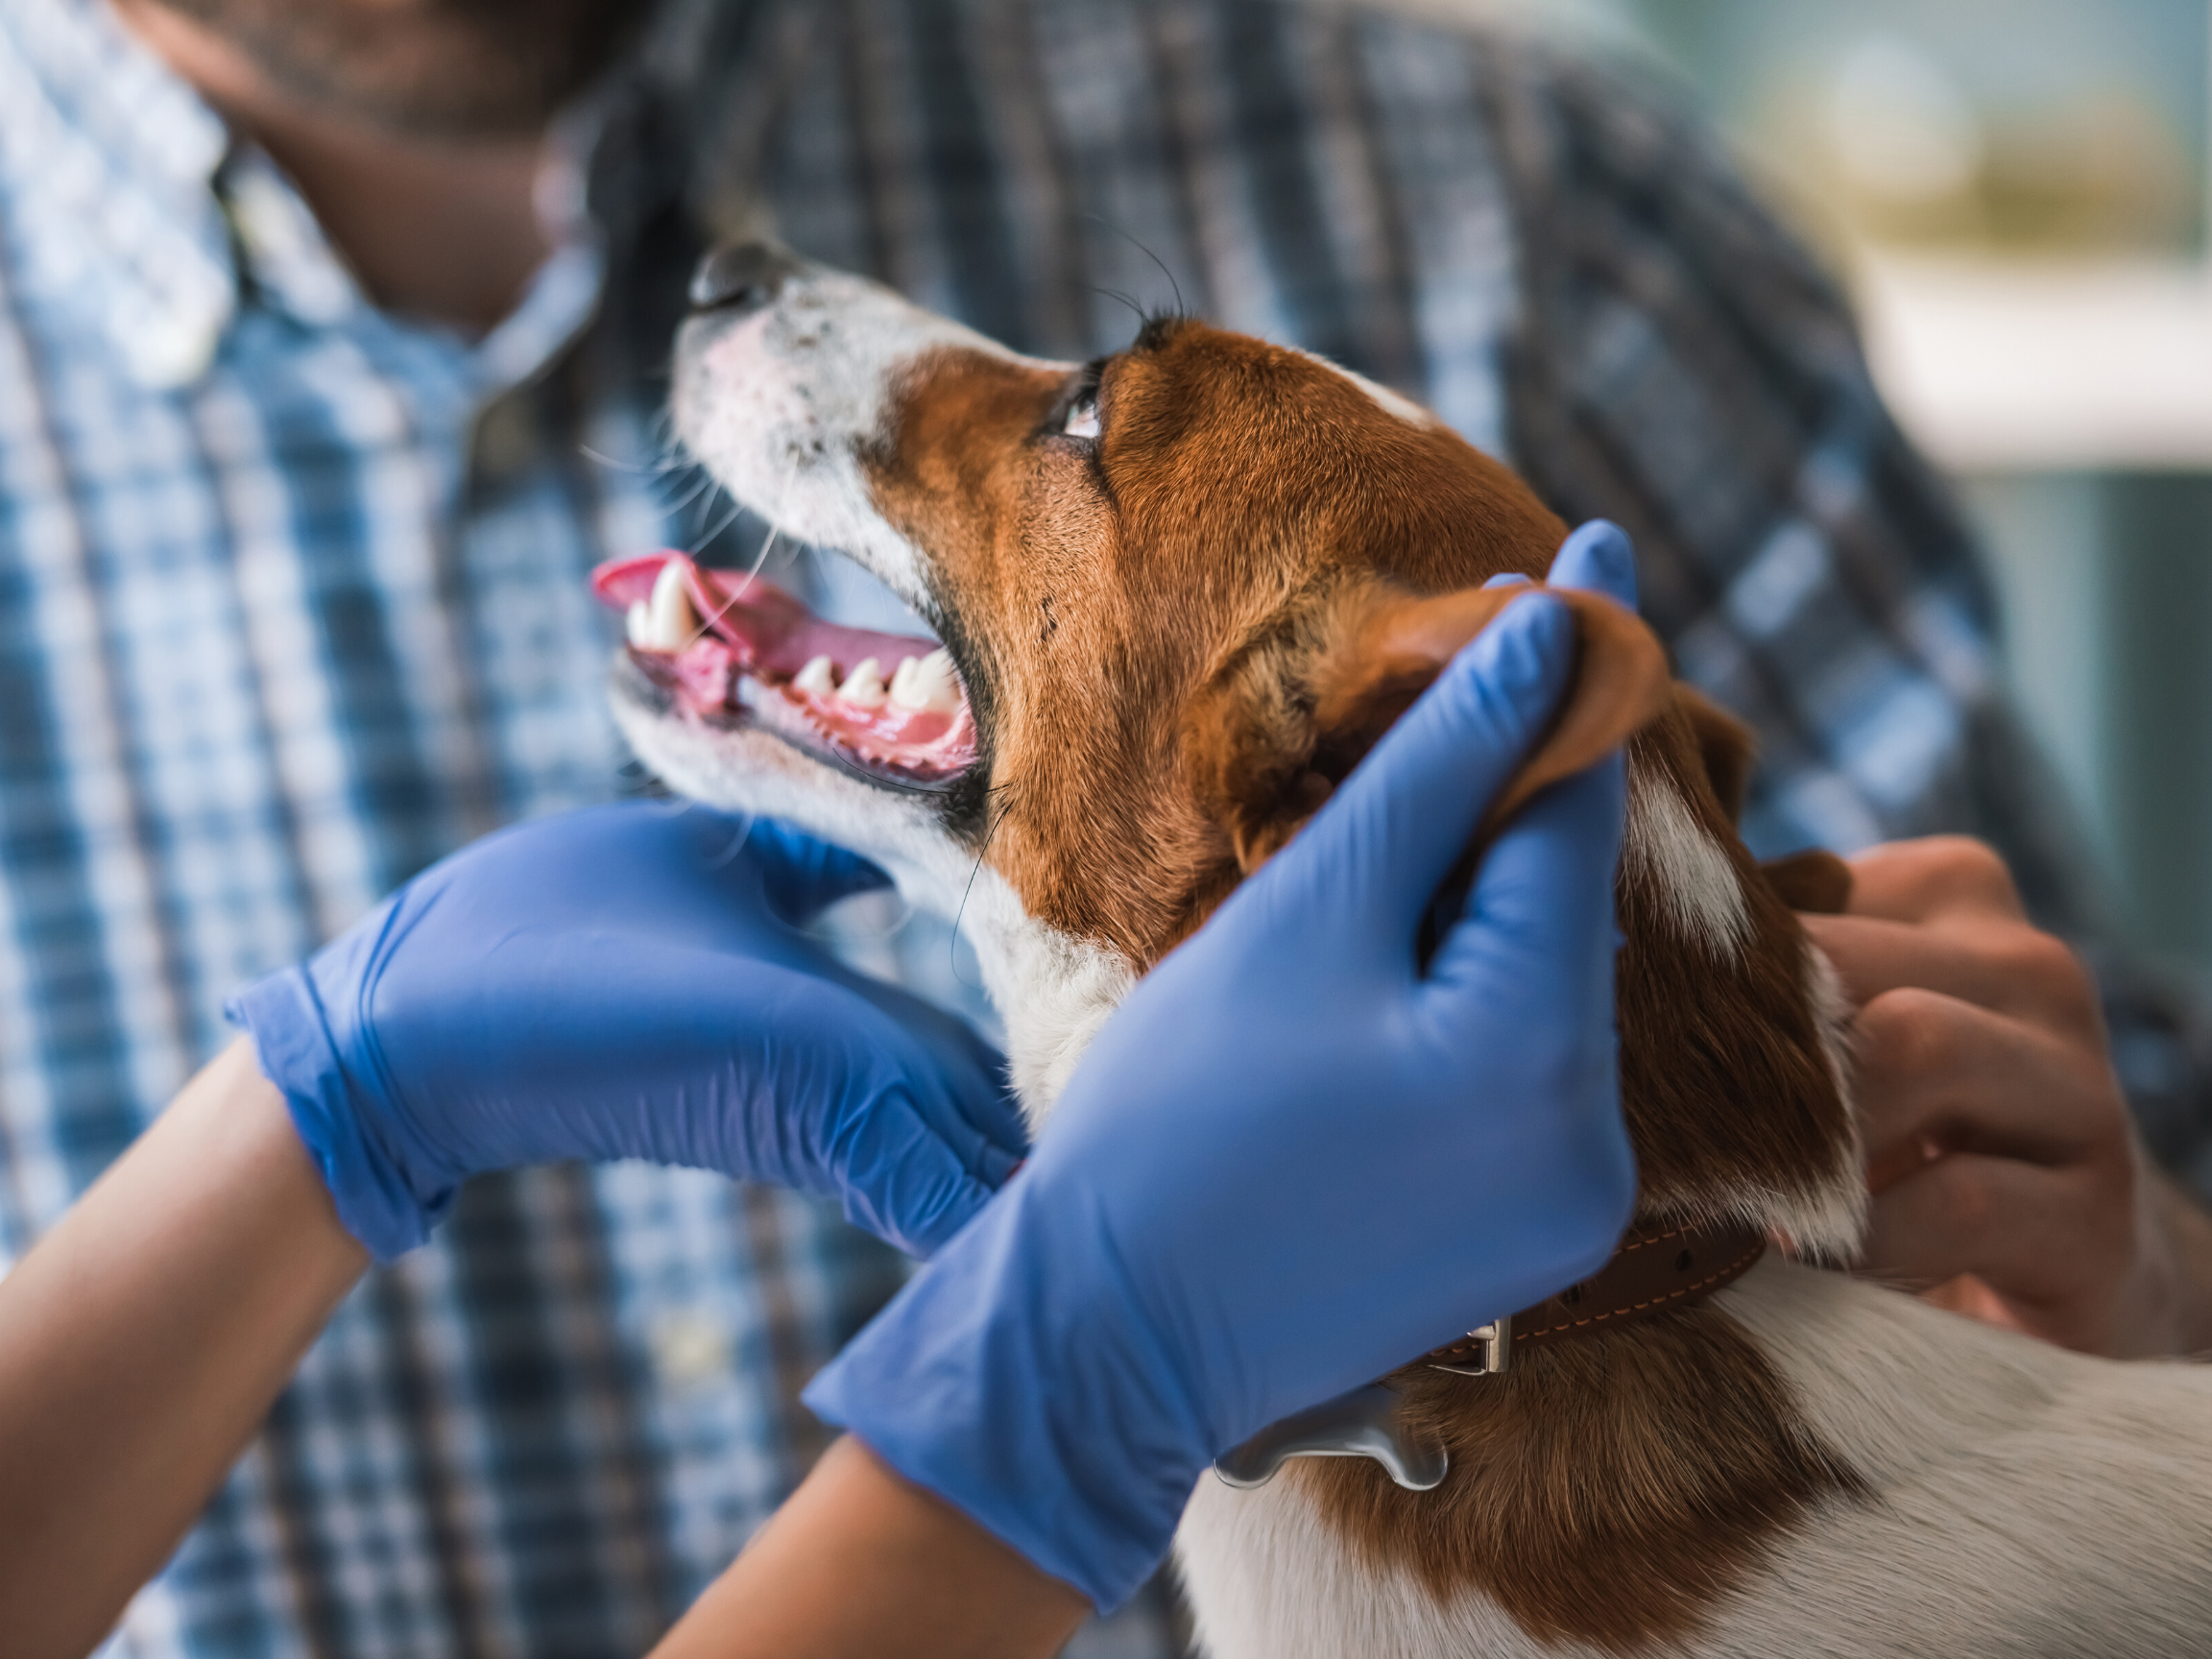 How We Can Support Vet Clinics